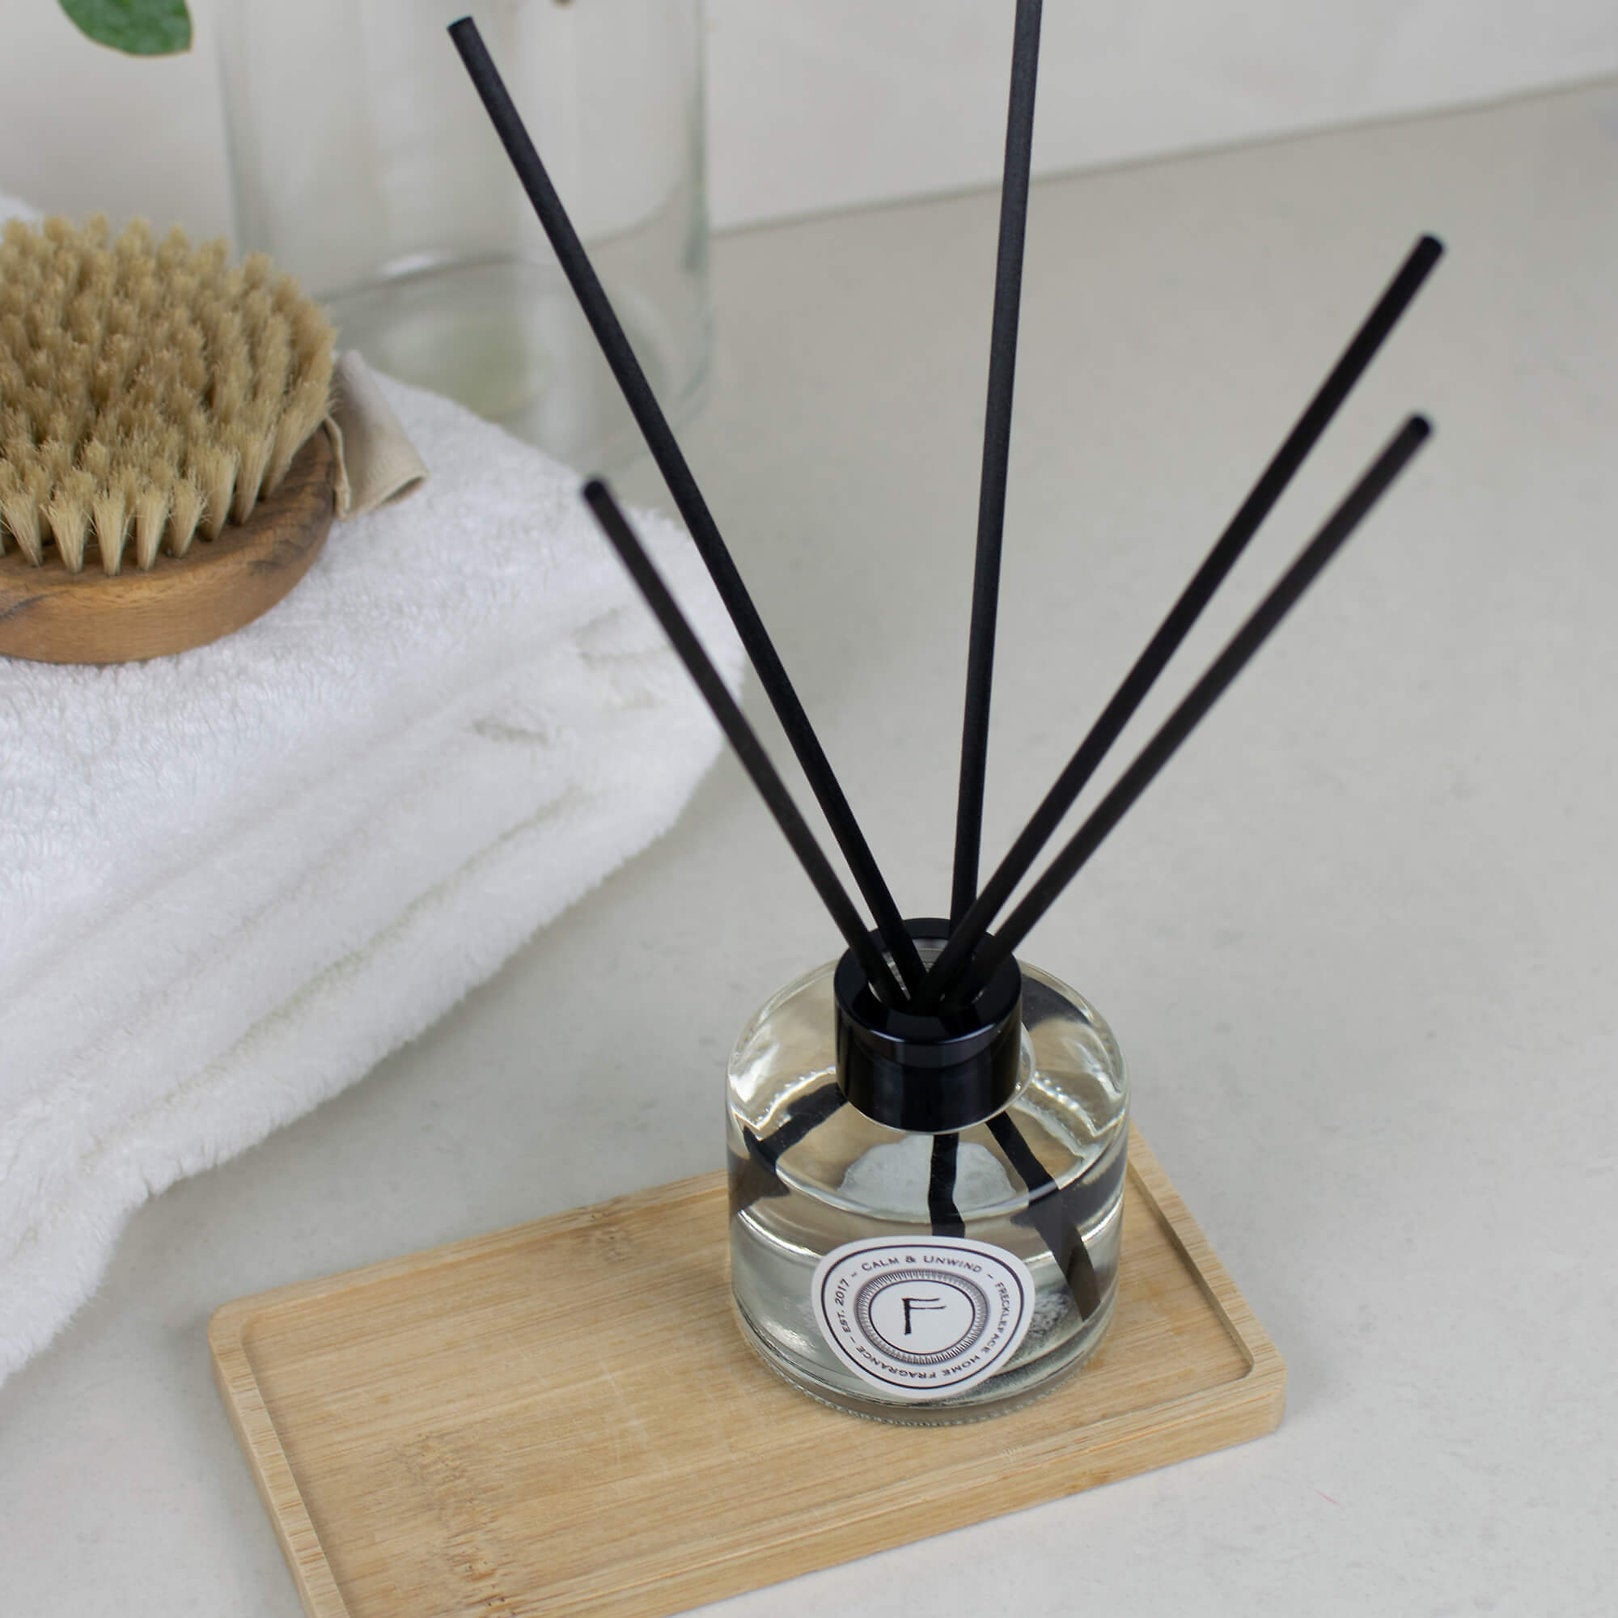 Freckleface Clean Laundry Reed Diffuser - Bumble Living